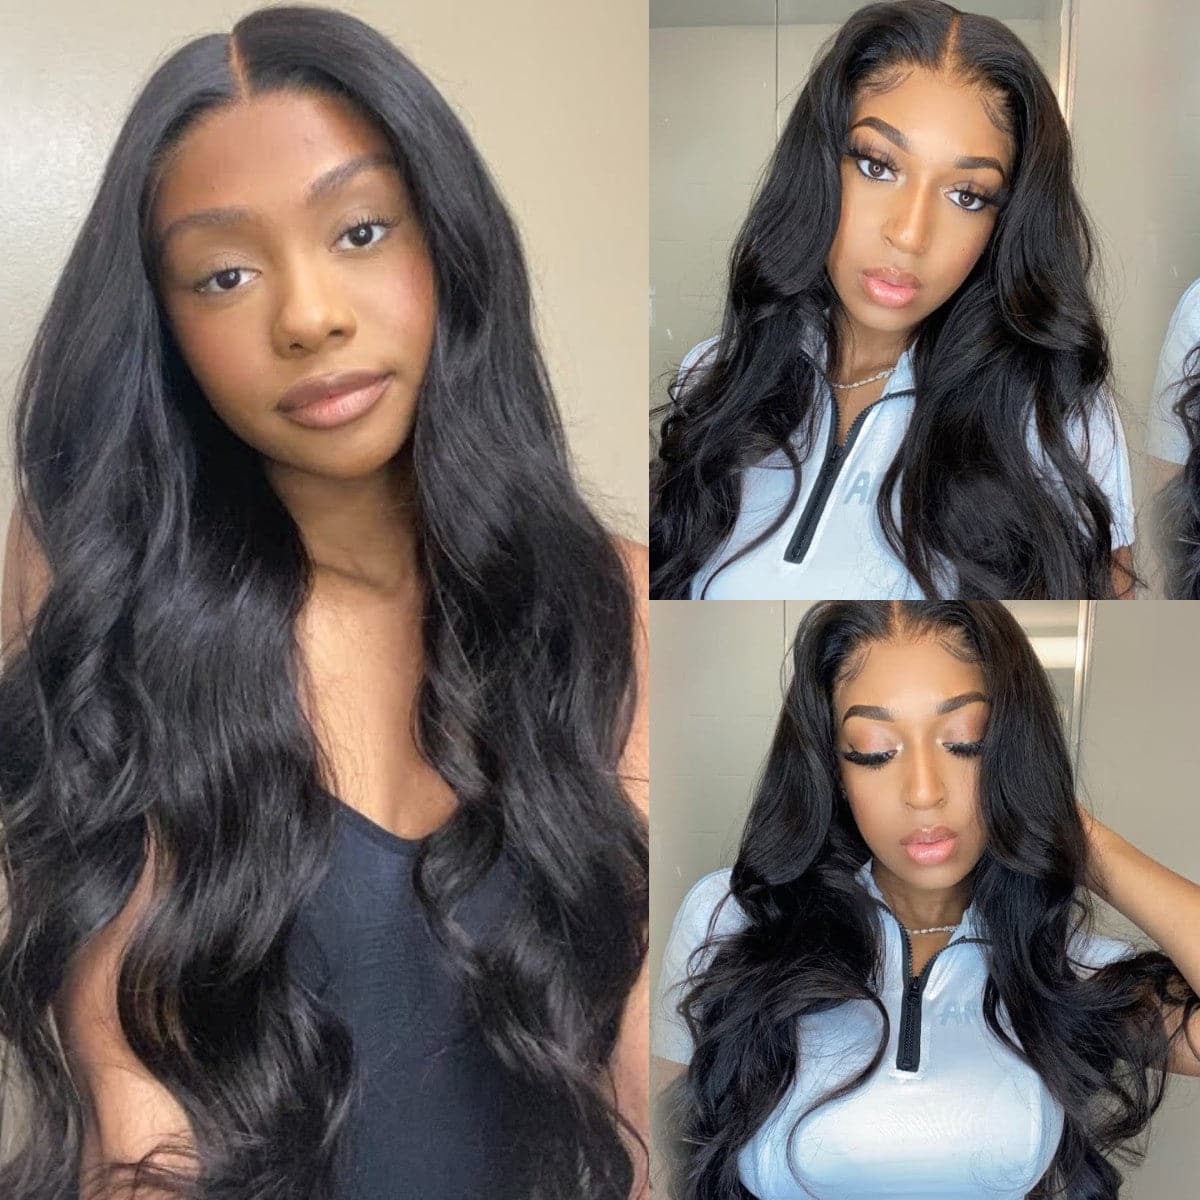 Limited Sale Urgirl 13x4 Lace Front Wigs Body Wave 150% Density Remy Human Hair Wigs